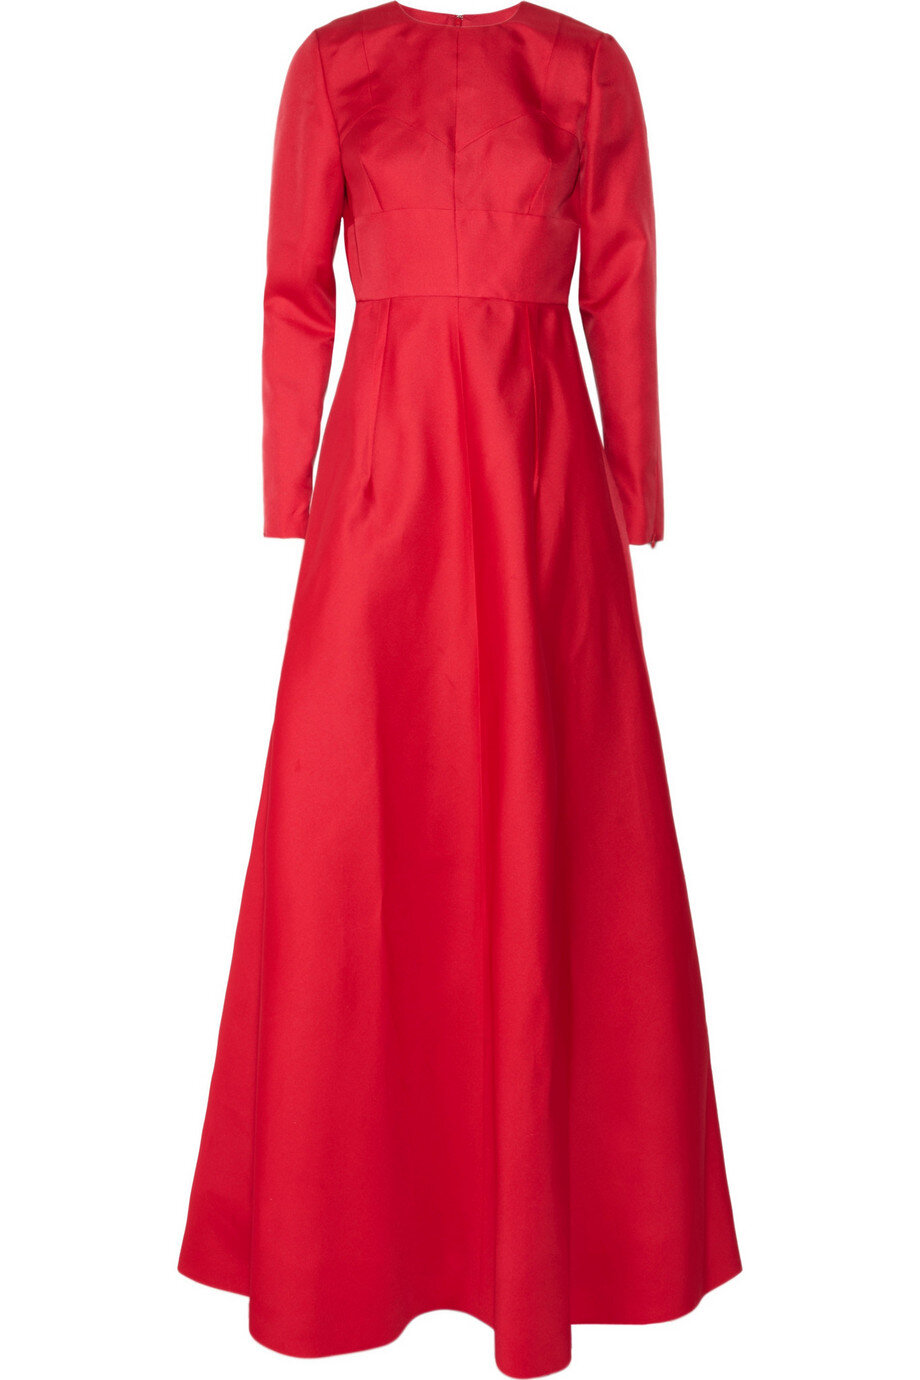 Red Dress  Buy Tomato Red Dresses for Women Online in India